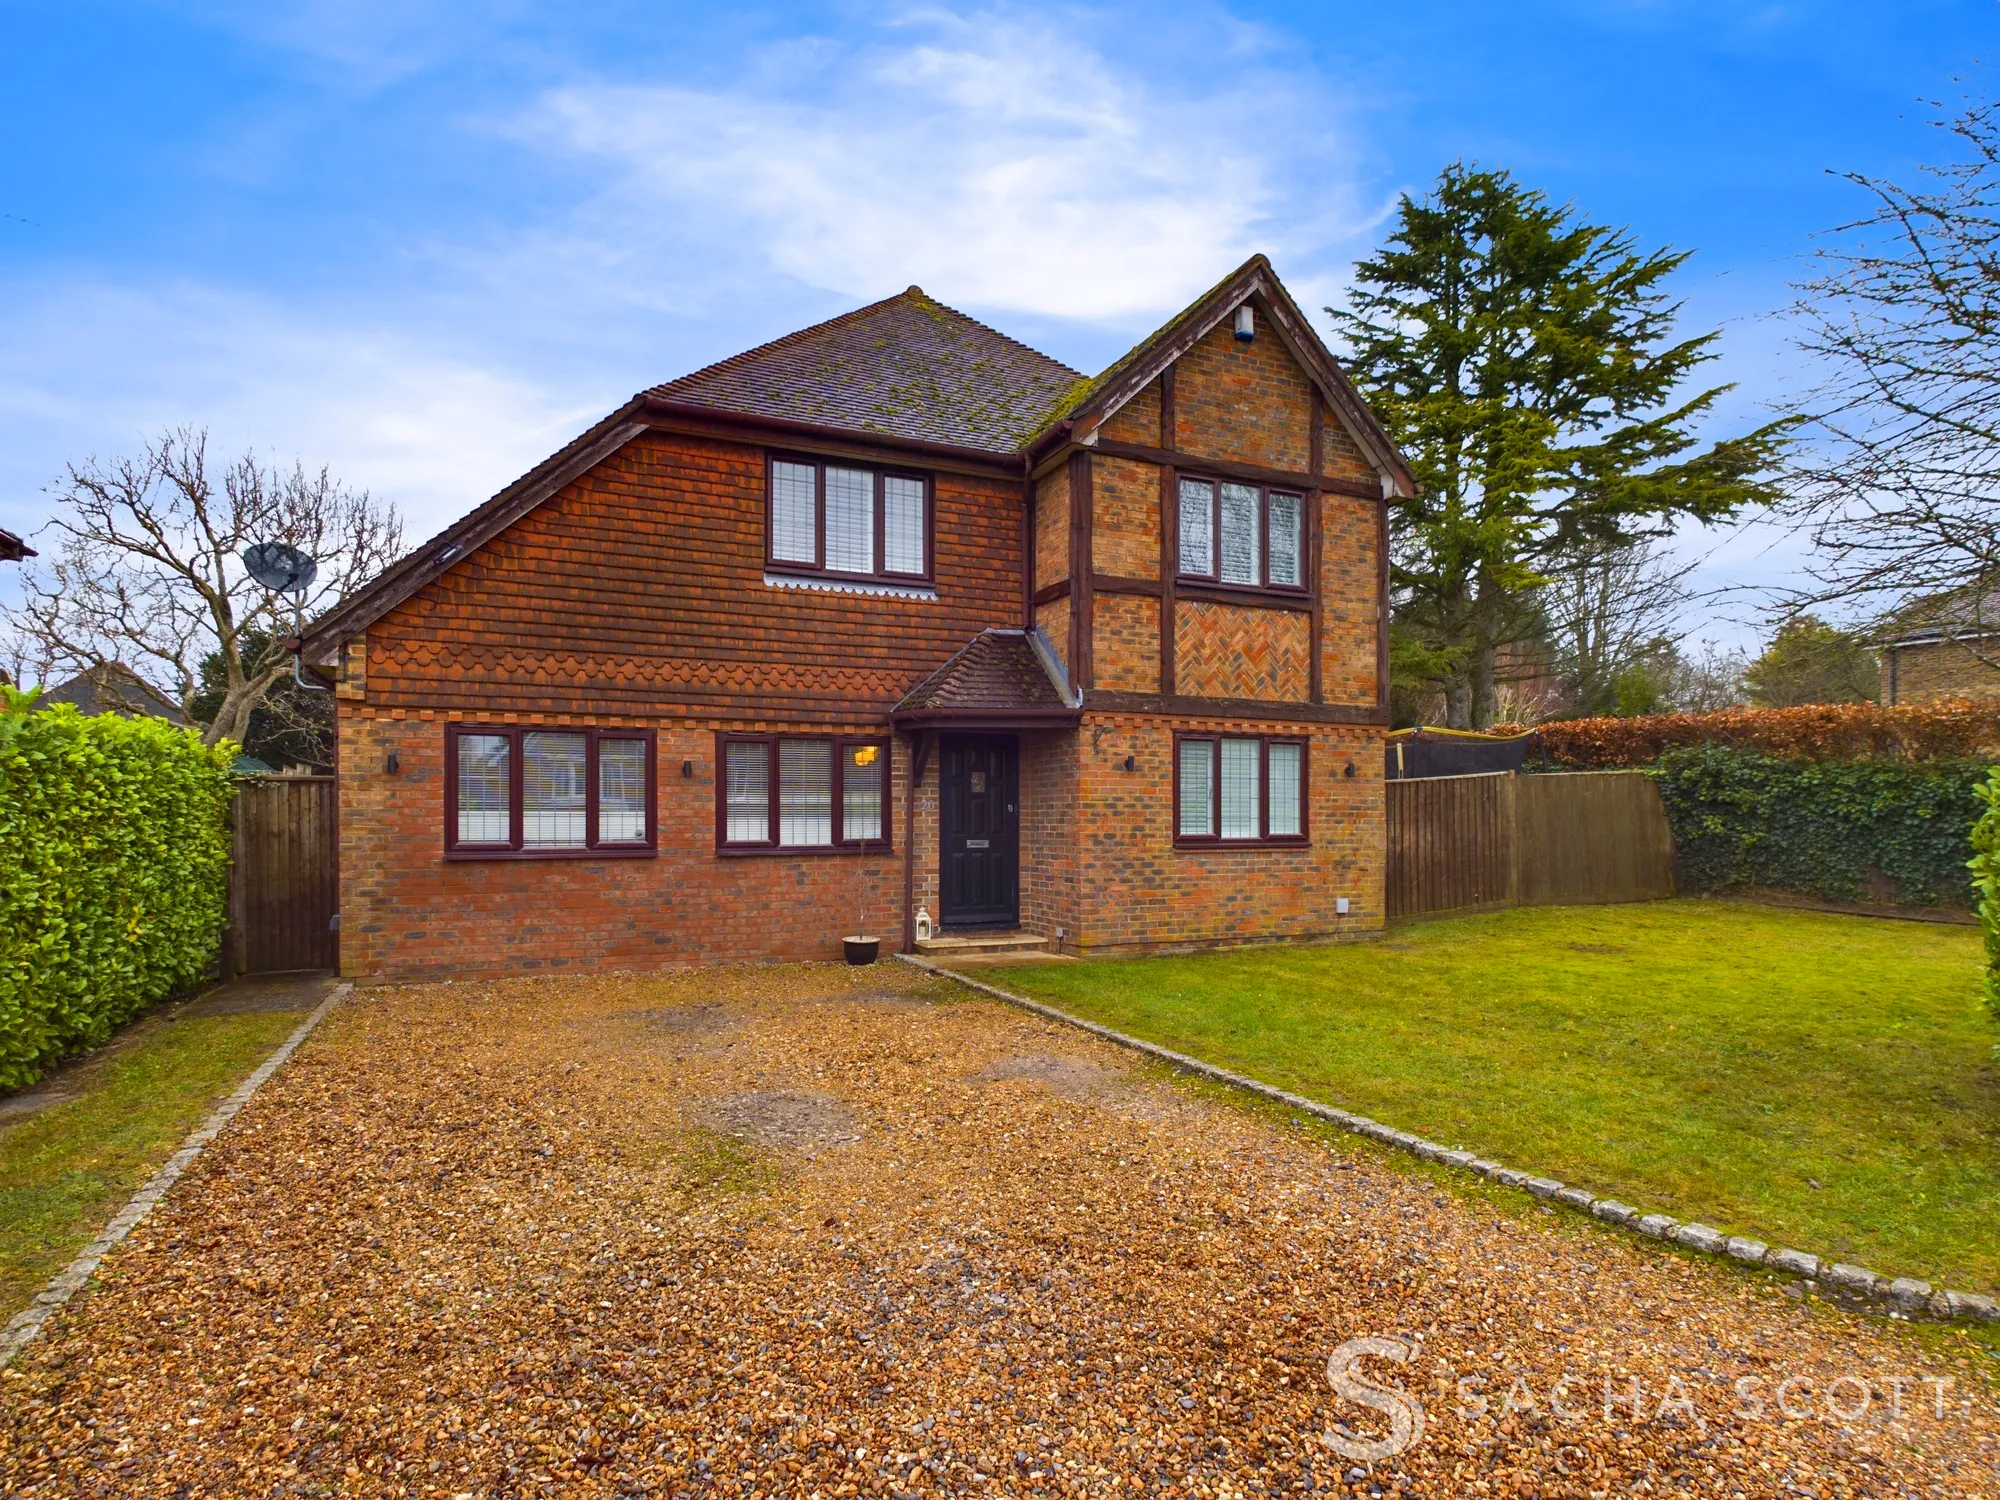 4 bed detached house for sale in Walnut Grove, Banstead  - Property Image 1